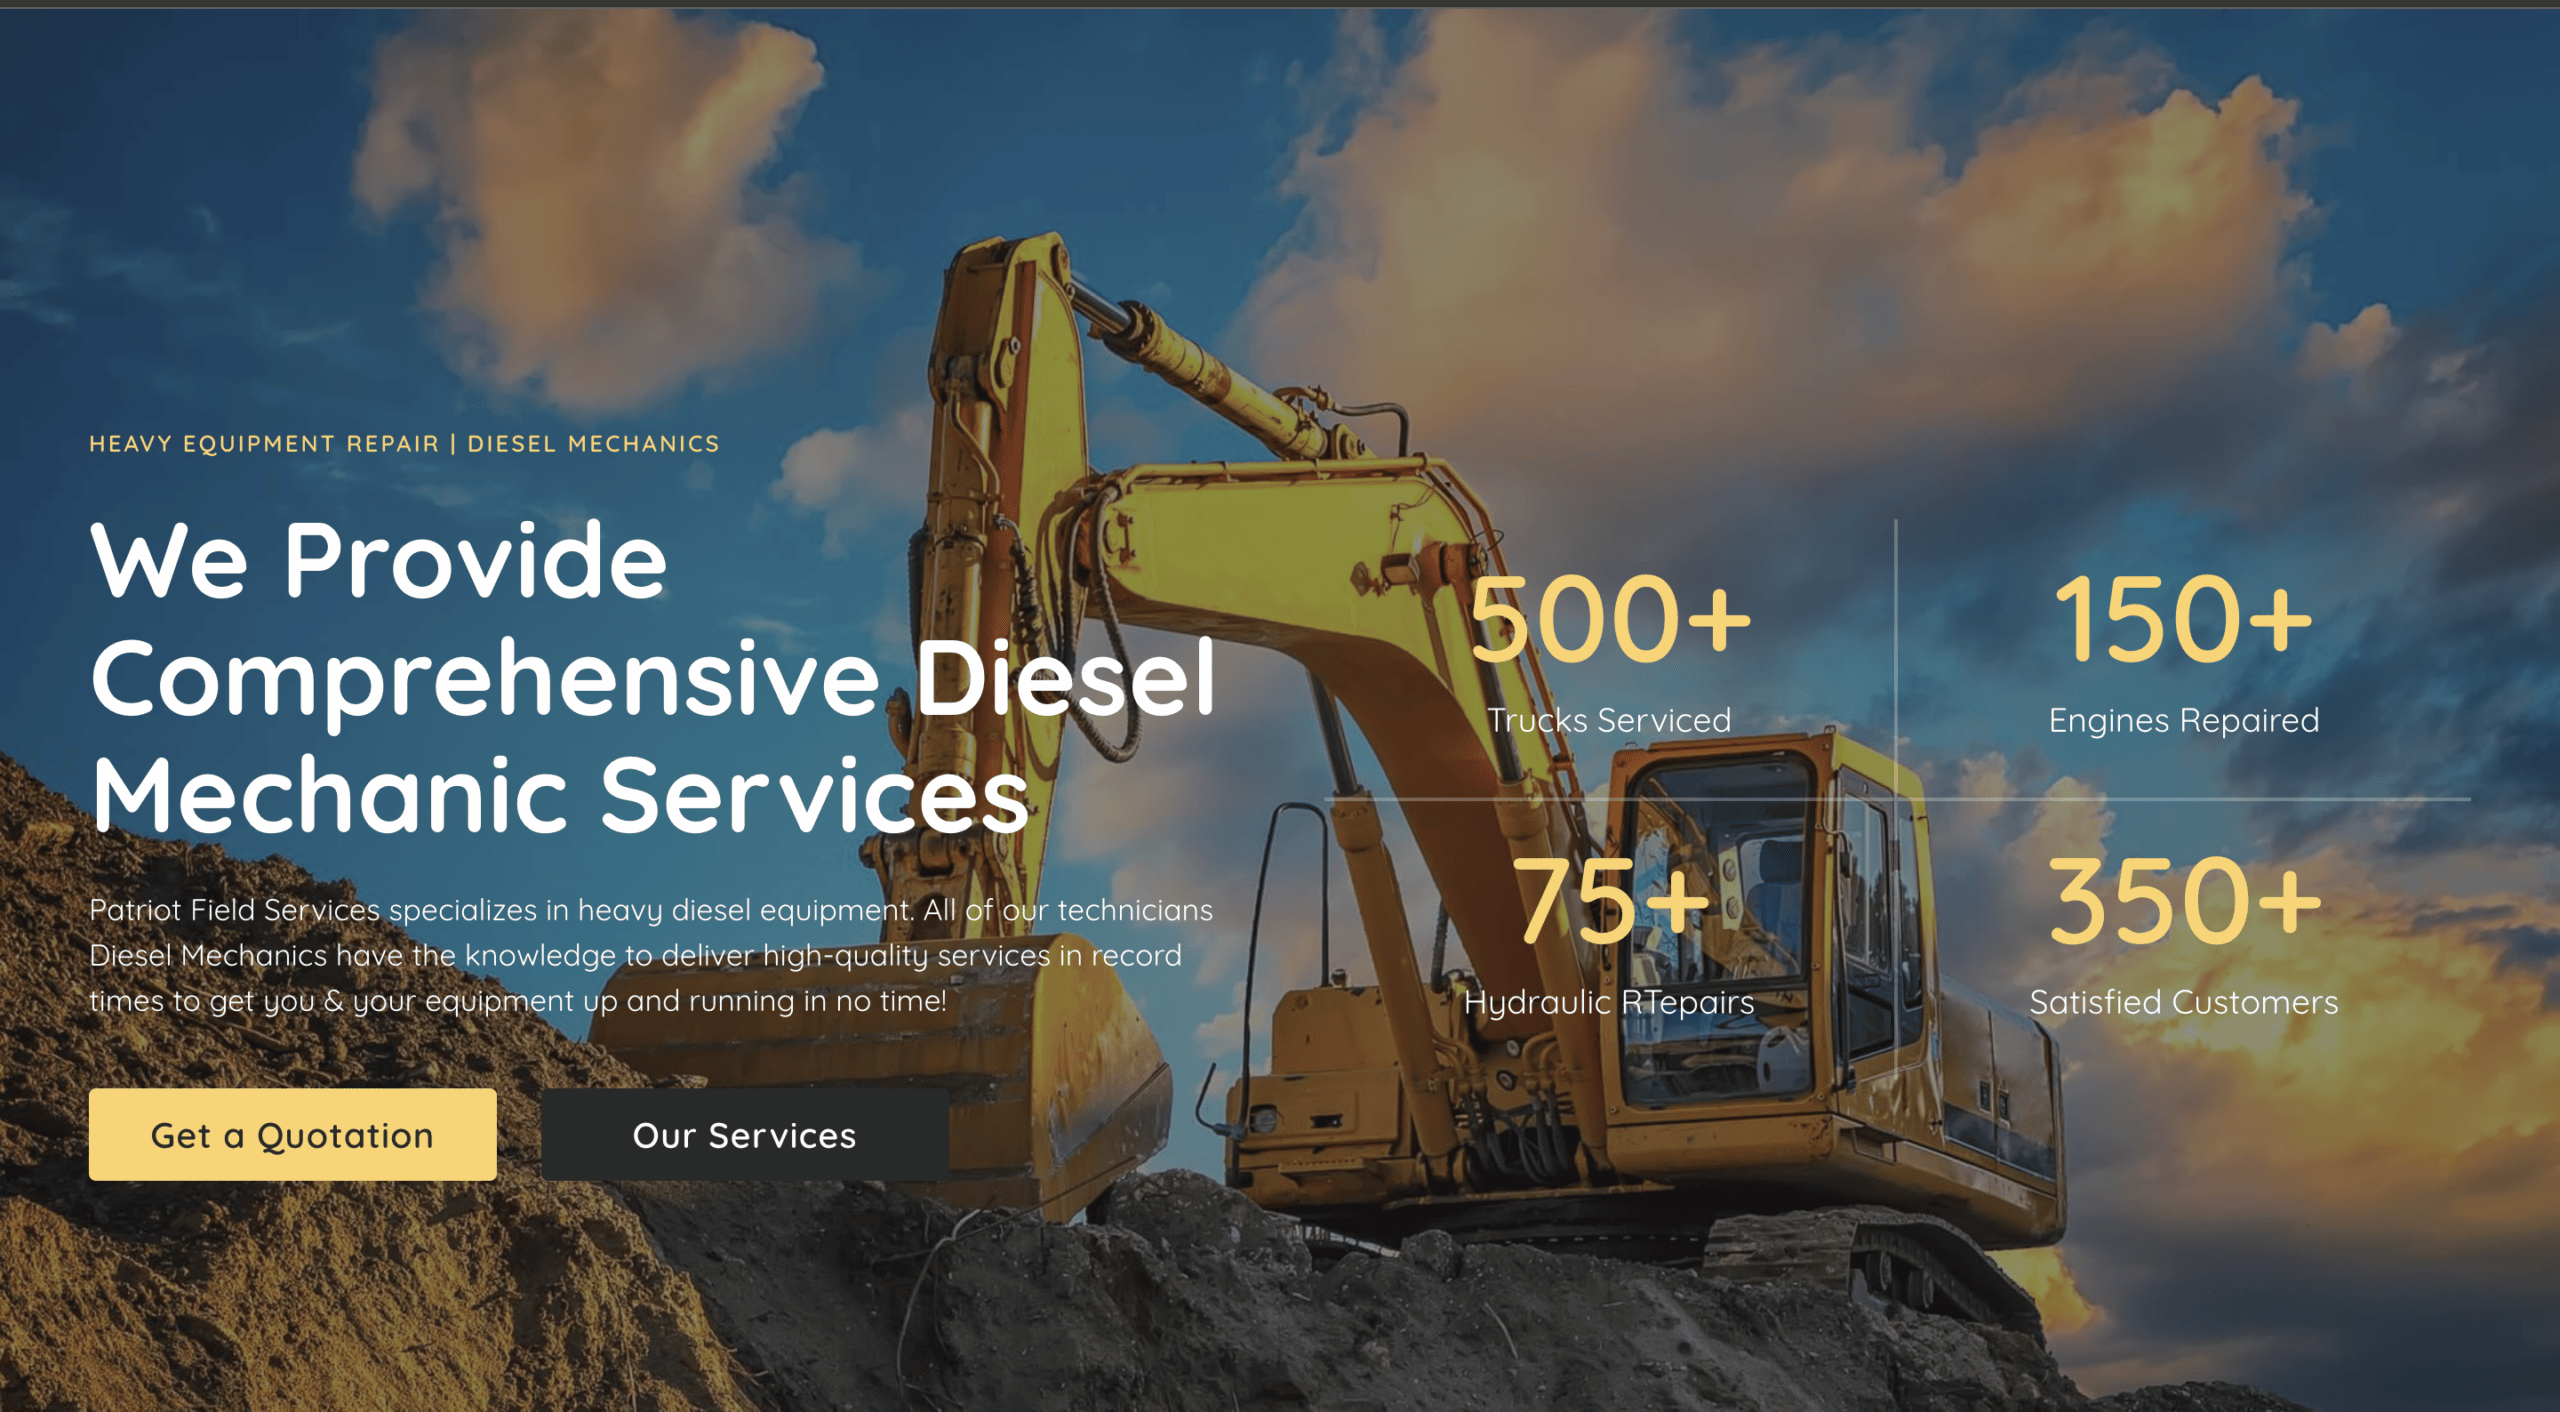 A web page for a heavy equipment repair and diesel mechanics service, featuring key statistics, a call-to-action button, and highlights from our successful website projects.